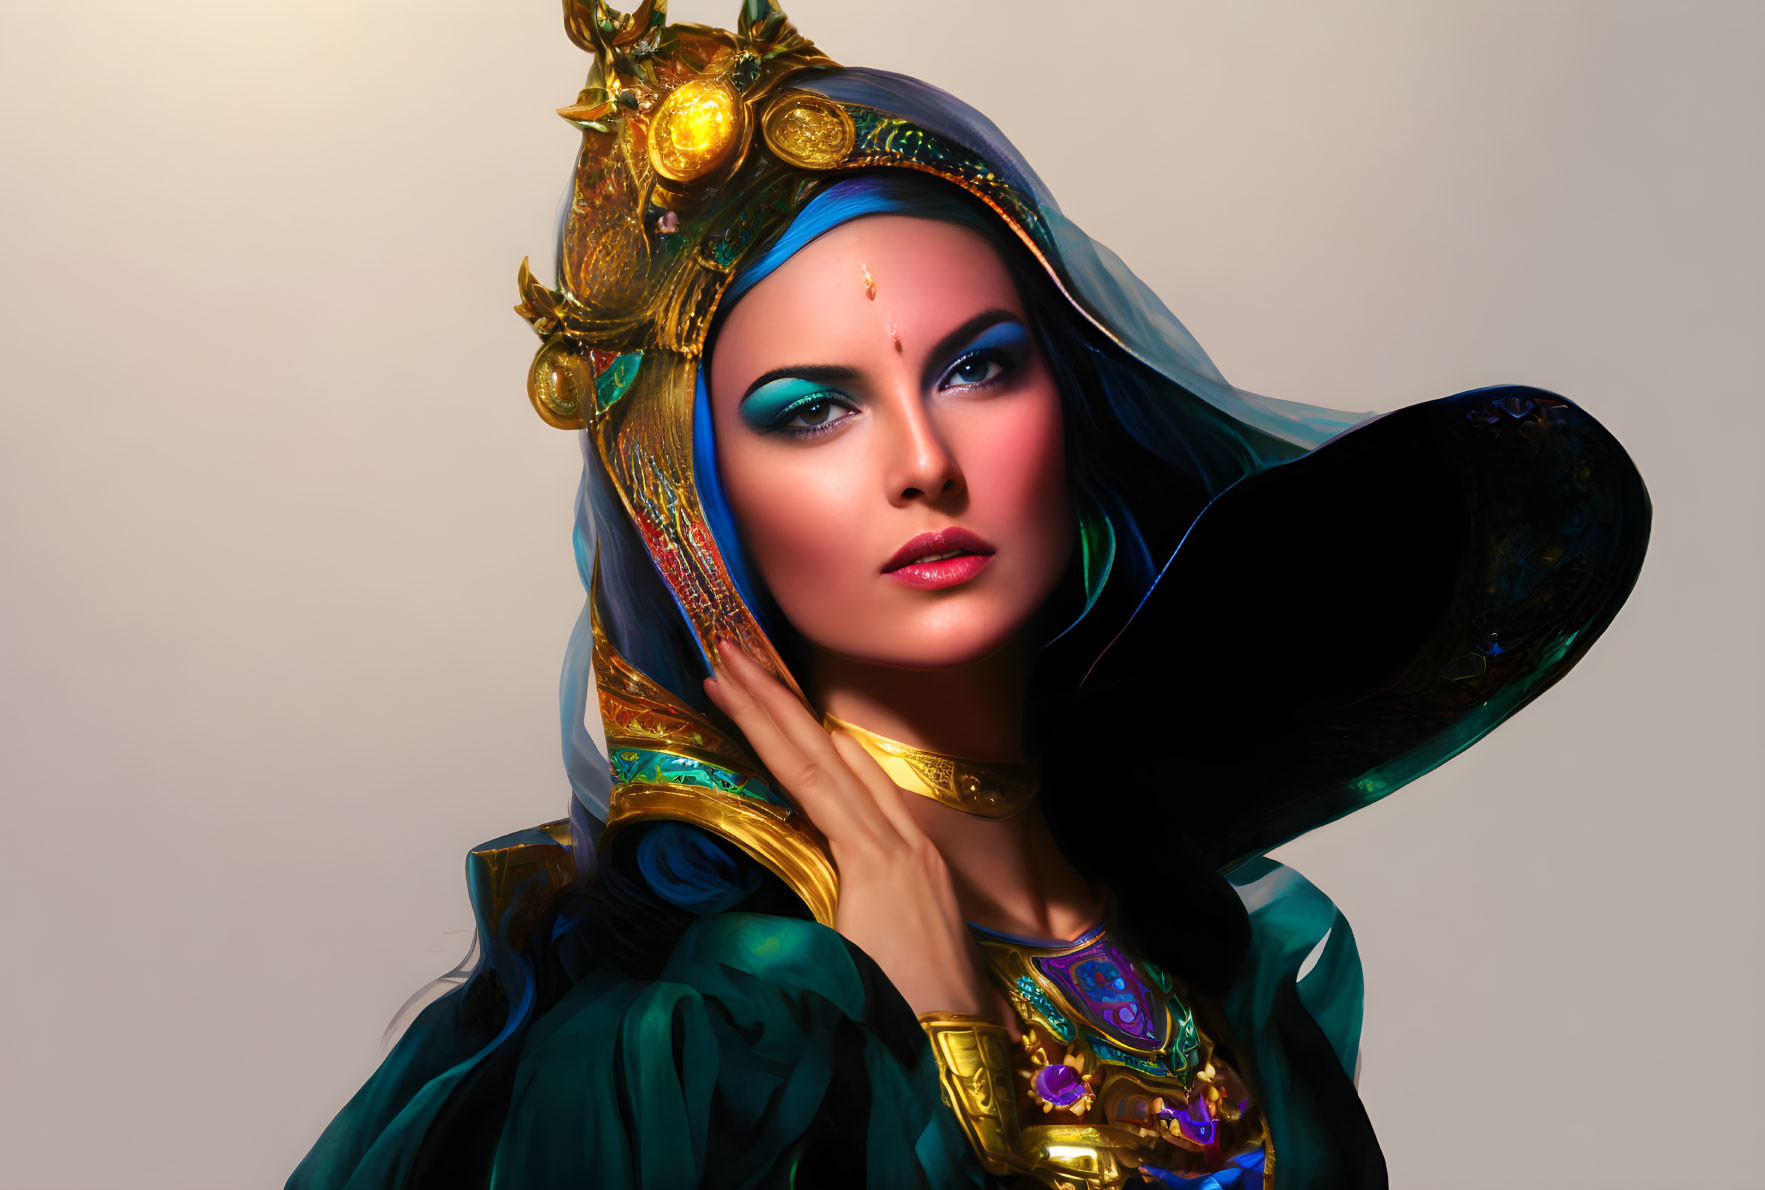 Detailed digital art portrait of woman with blue eyes and ornate headdress in vibrant colors